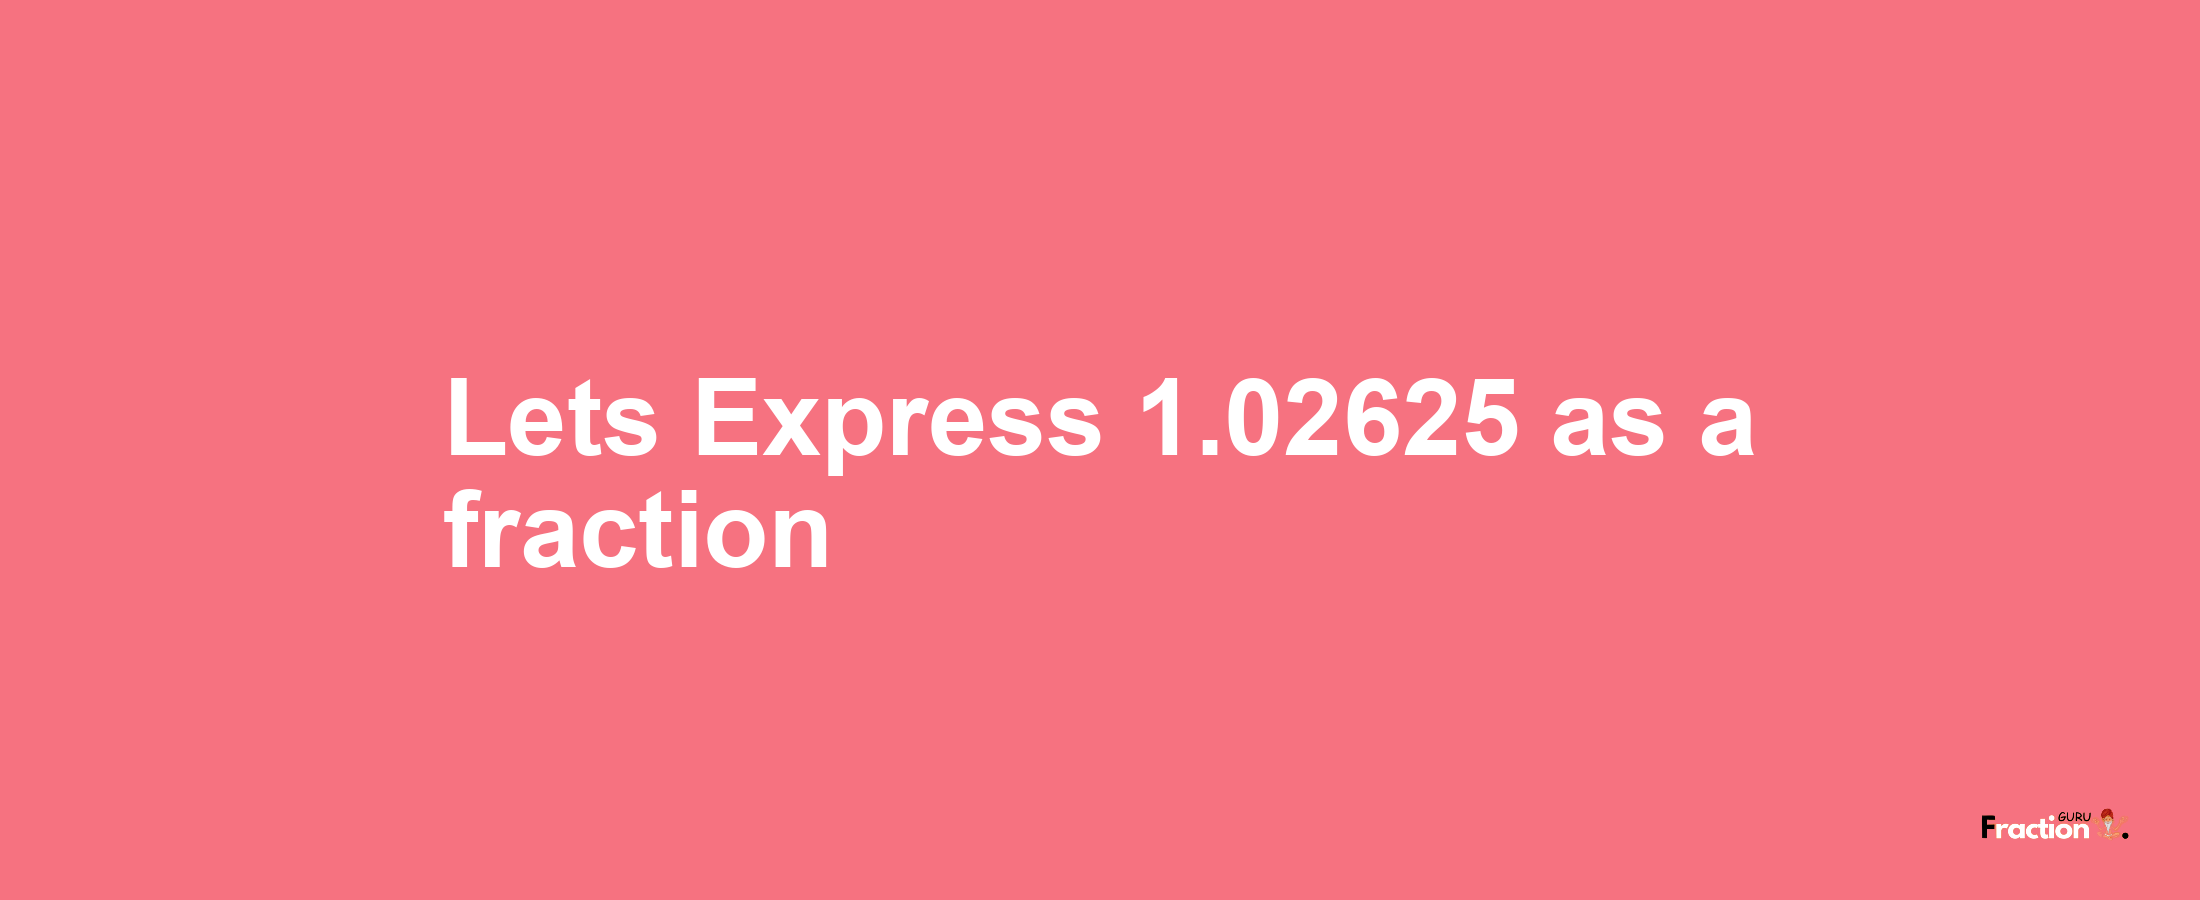 Lets Express 1.02625 as afraction